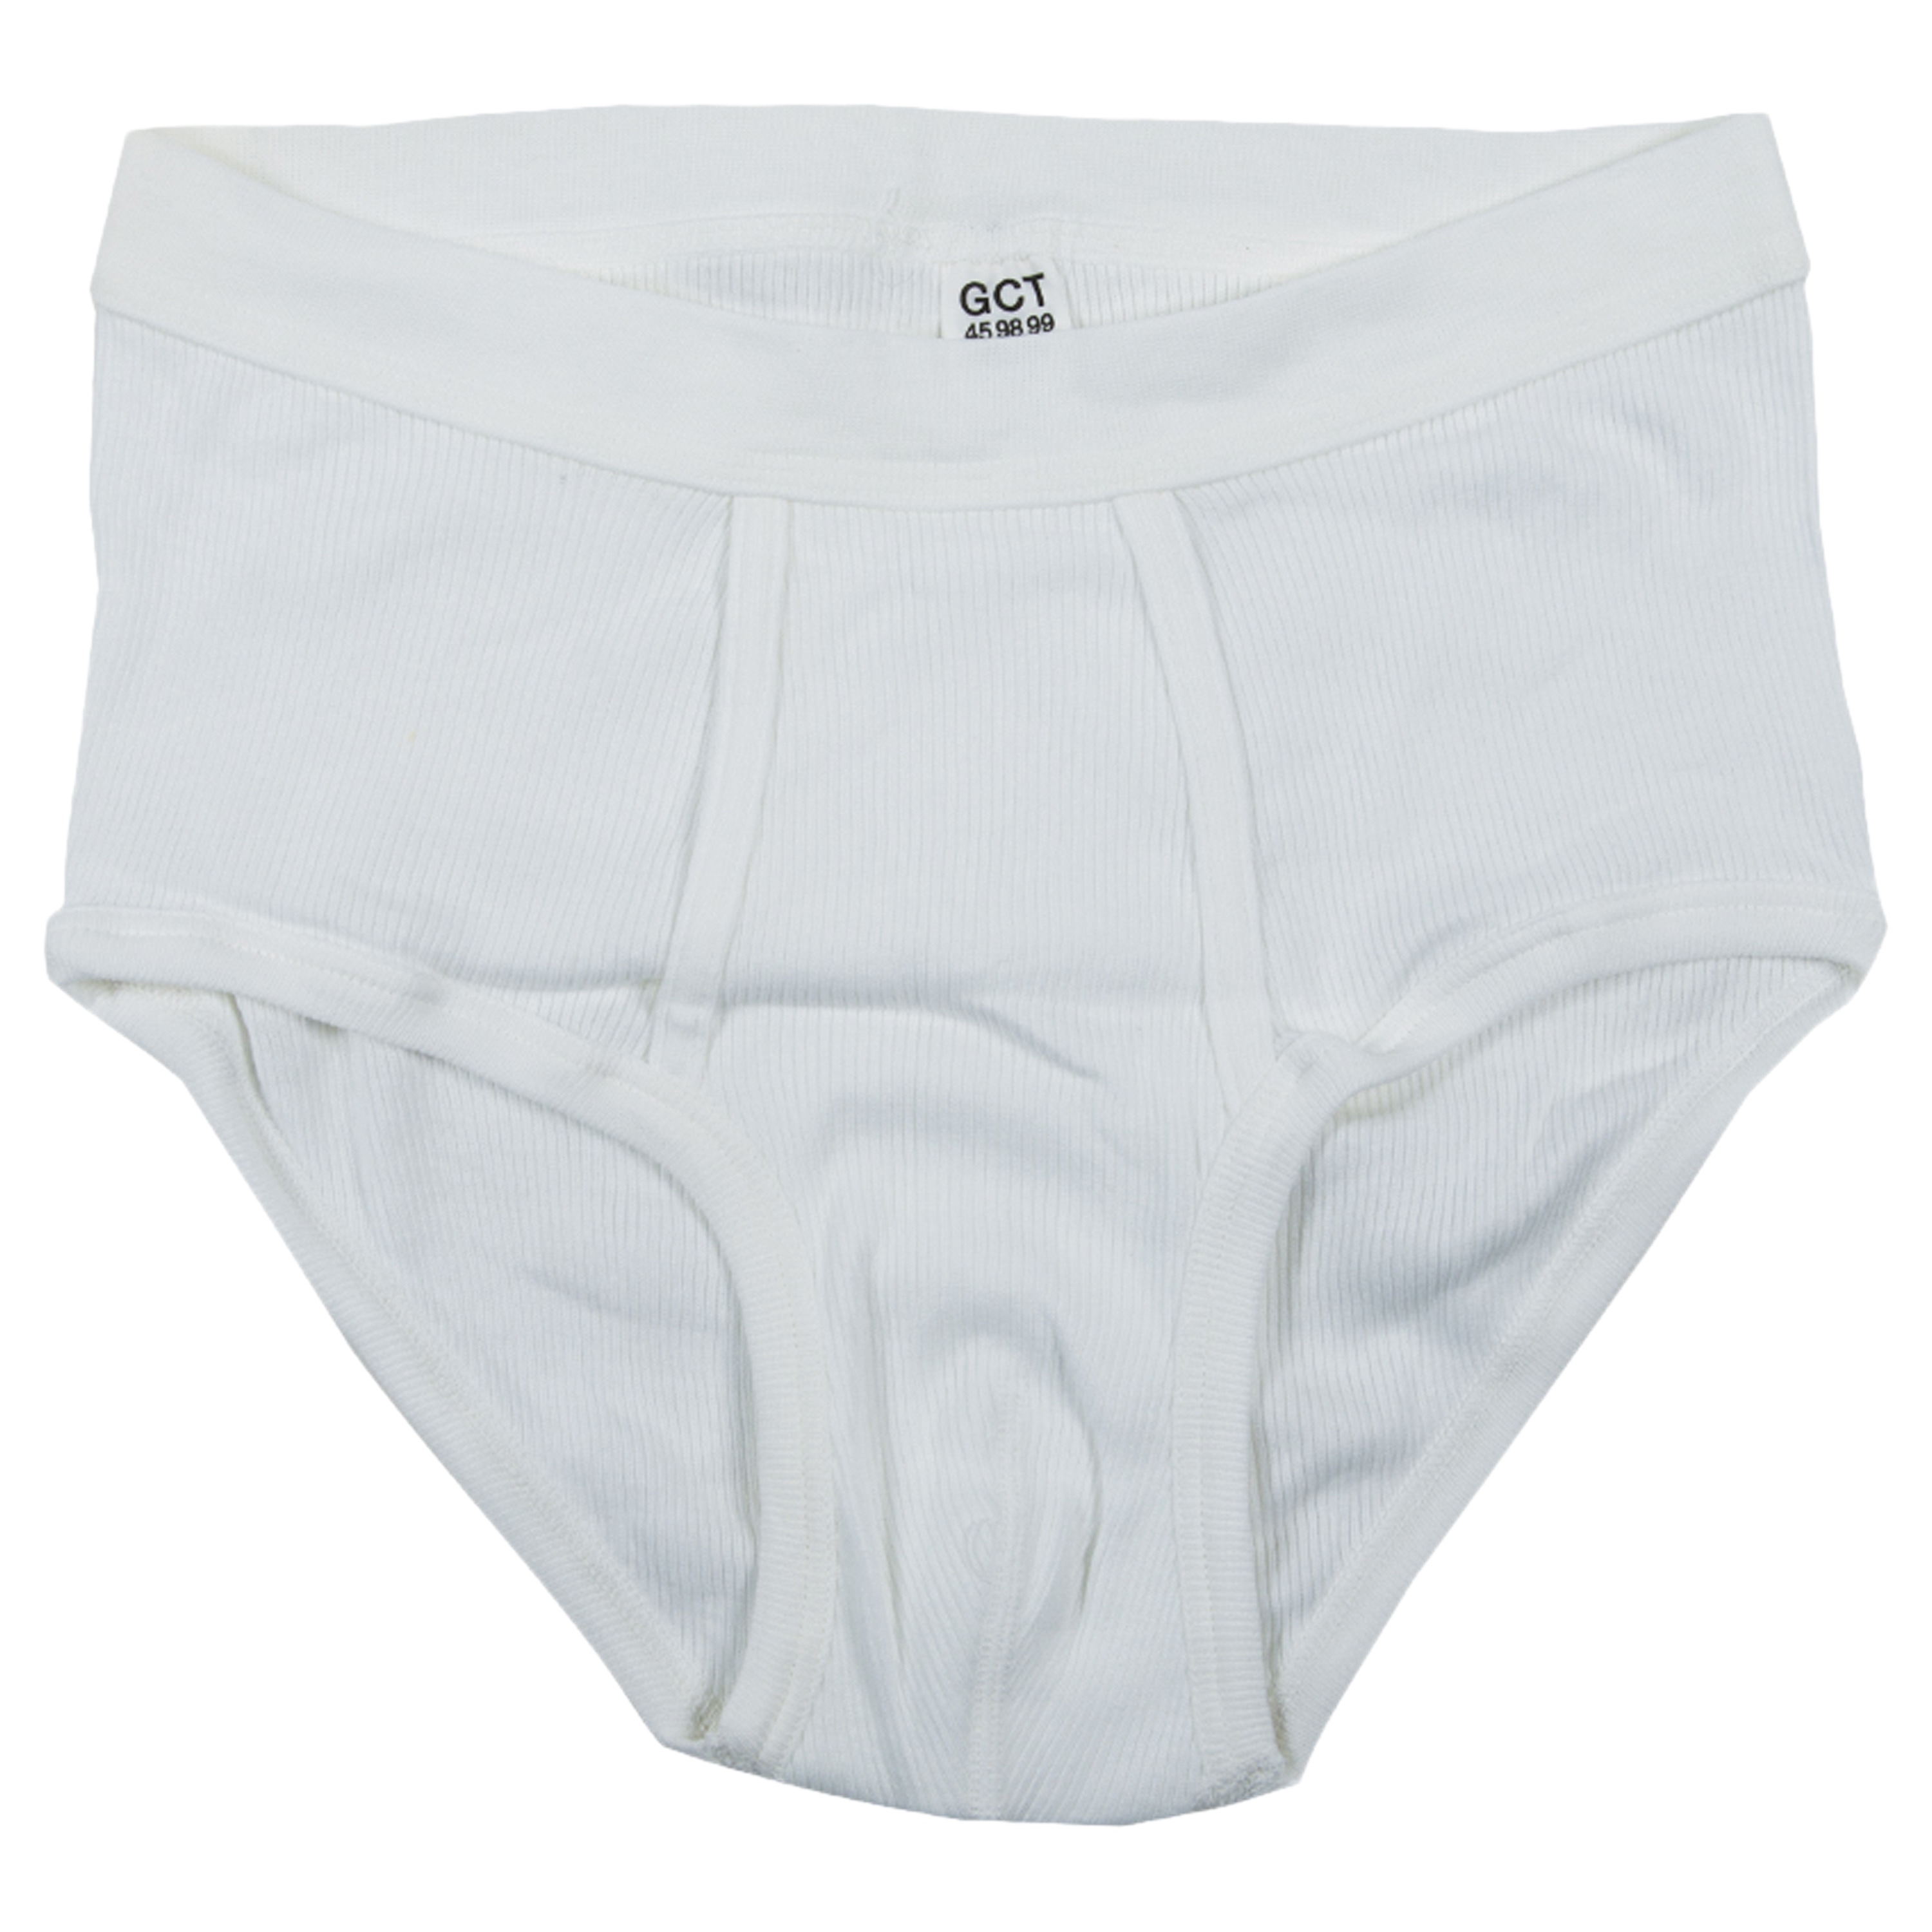 Purchase the BW Underwear Like New white by ASMC